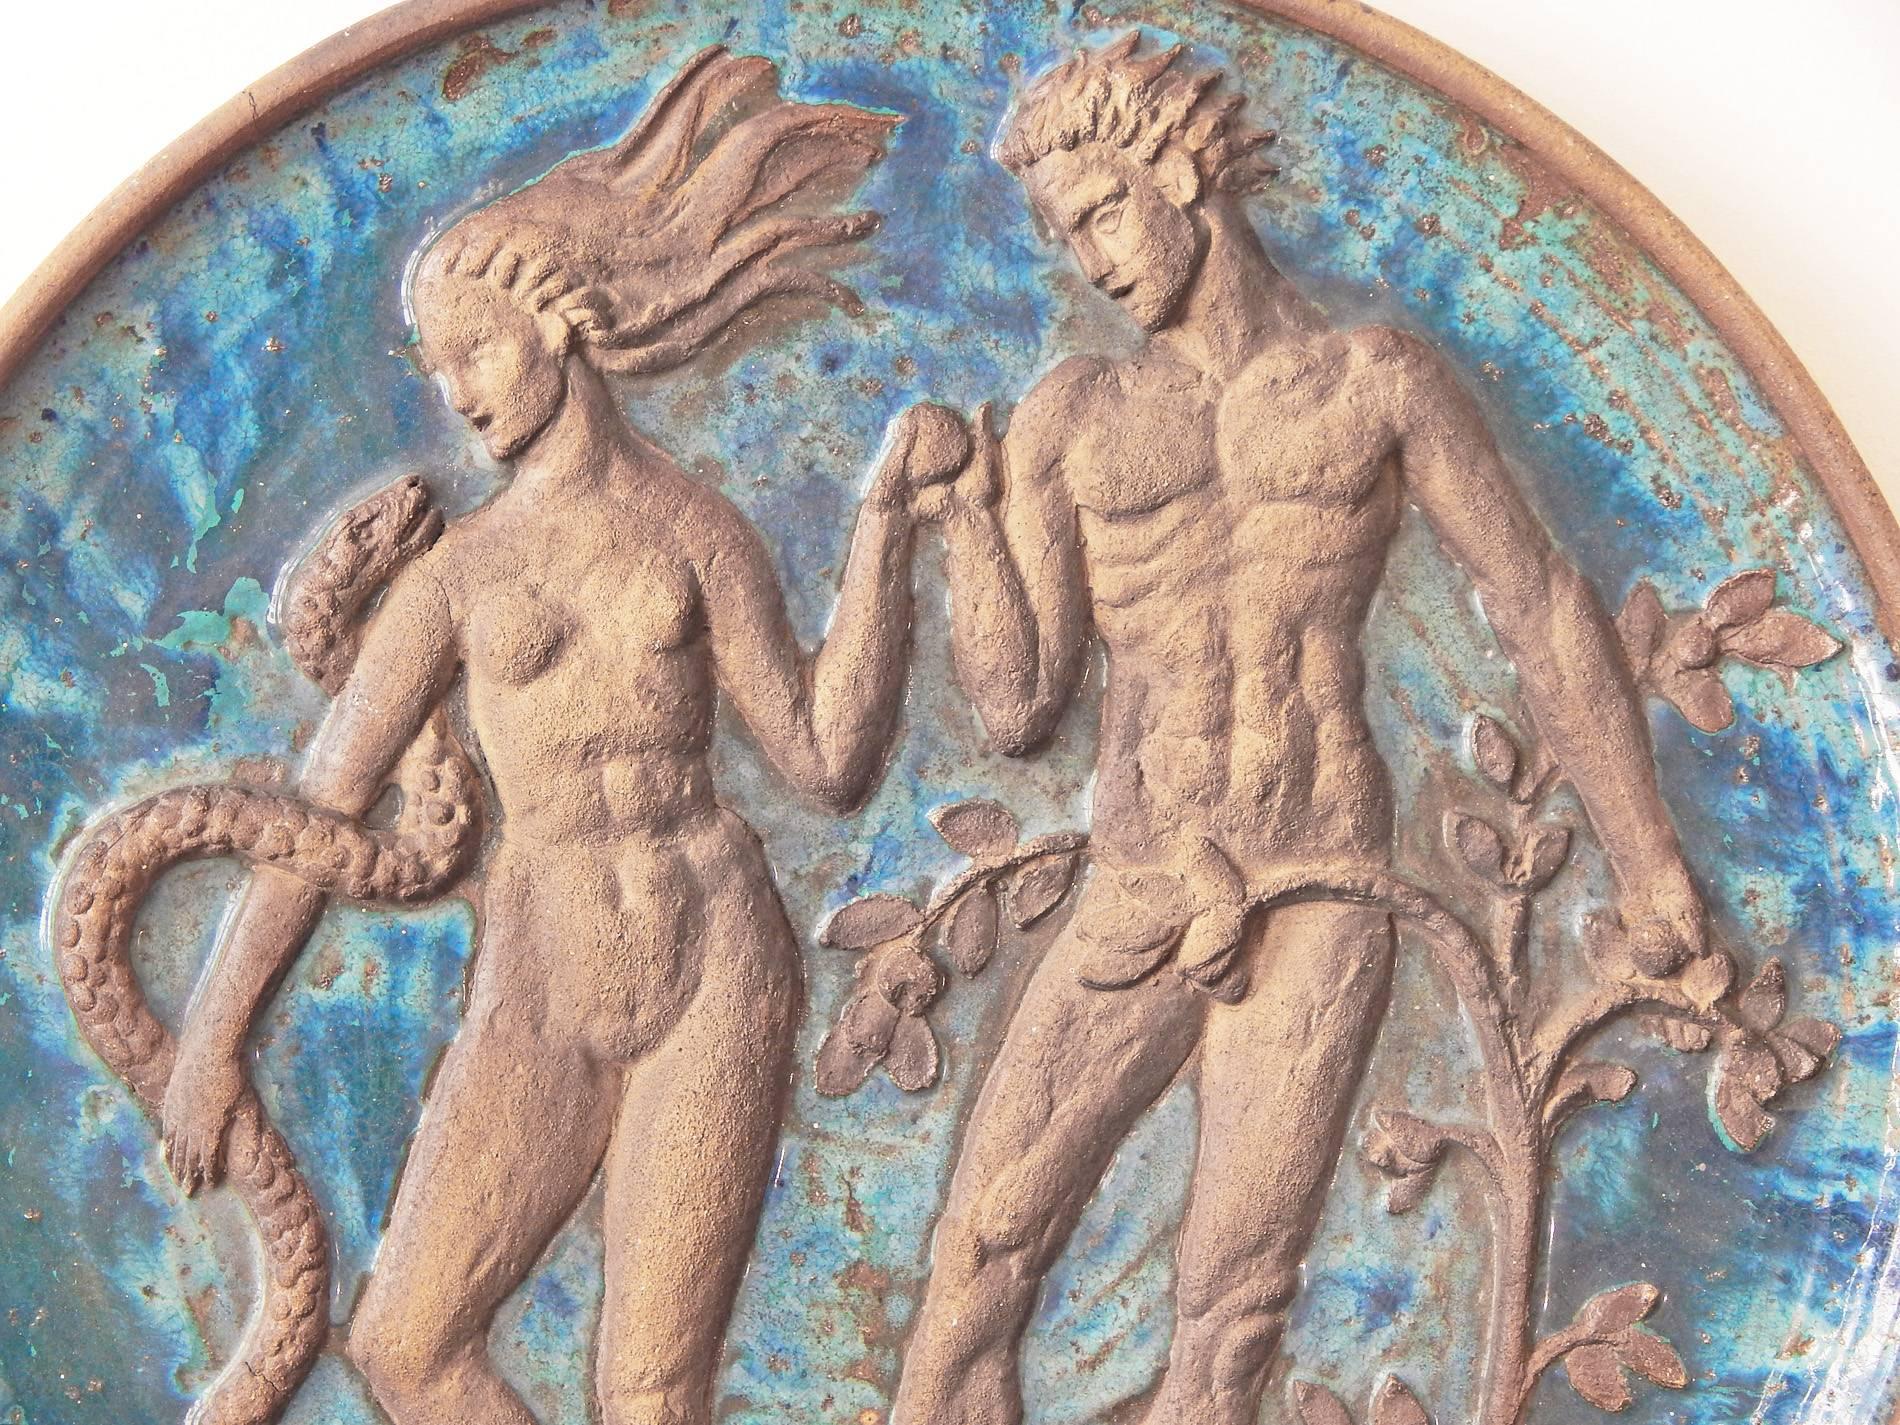 A magnificent example of WPA sculptor Waylande Gregory's work at the height of his career in the 1930s, when he was creating major fountains, public monuments and World's Fair sculptures, this panel depicts Adam and Eve at the moment when the